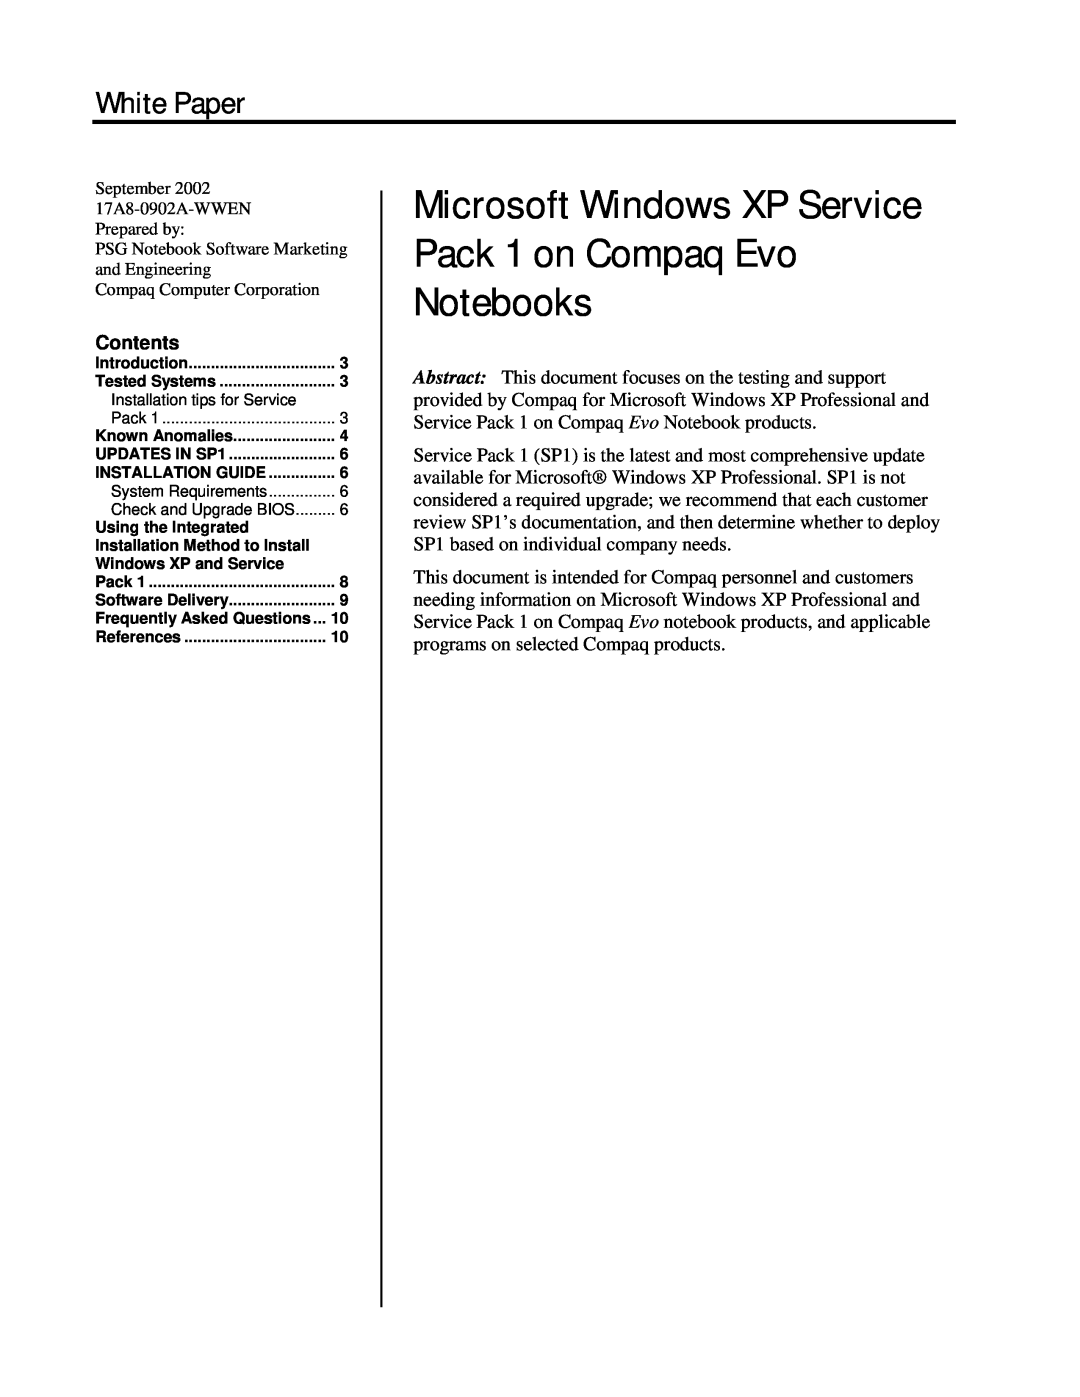 HP n115 manual White Paper, Microsoft Windows XP Service Pack 1 on Compaq Evo Notebooks, Contents 